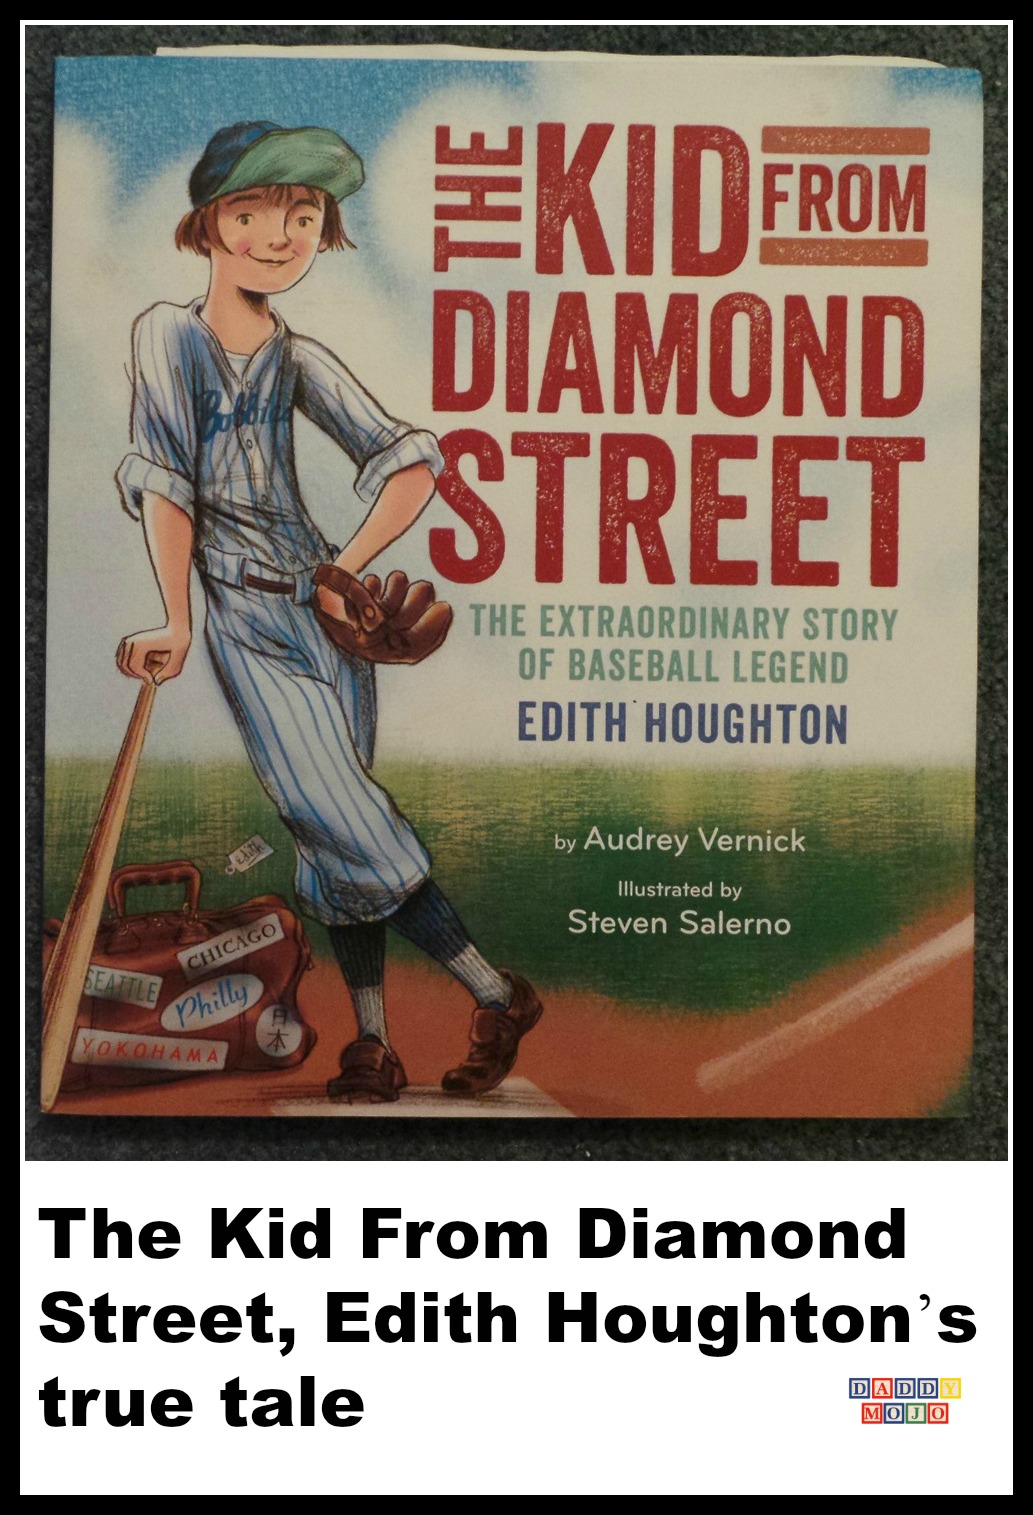 The Kid from Diamond Street by Audrey Vernick